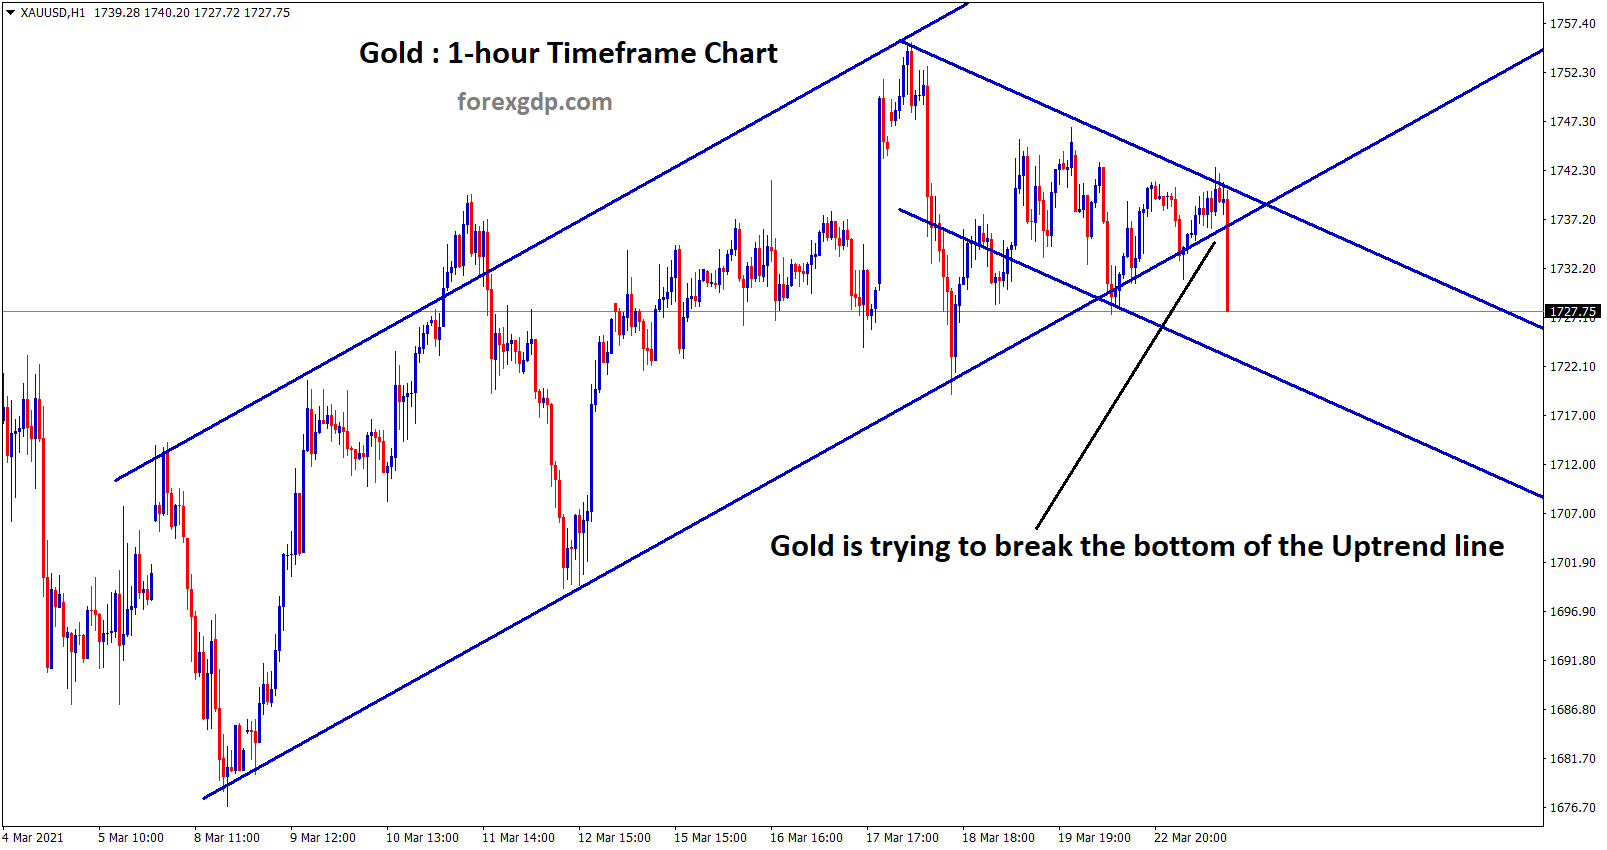 gold breaking the bottom of the uptrend line in 1hr chart